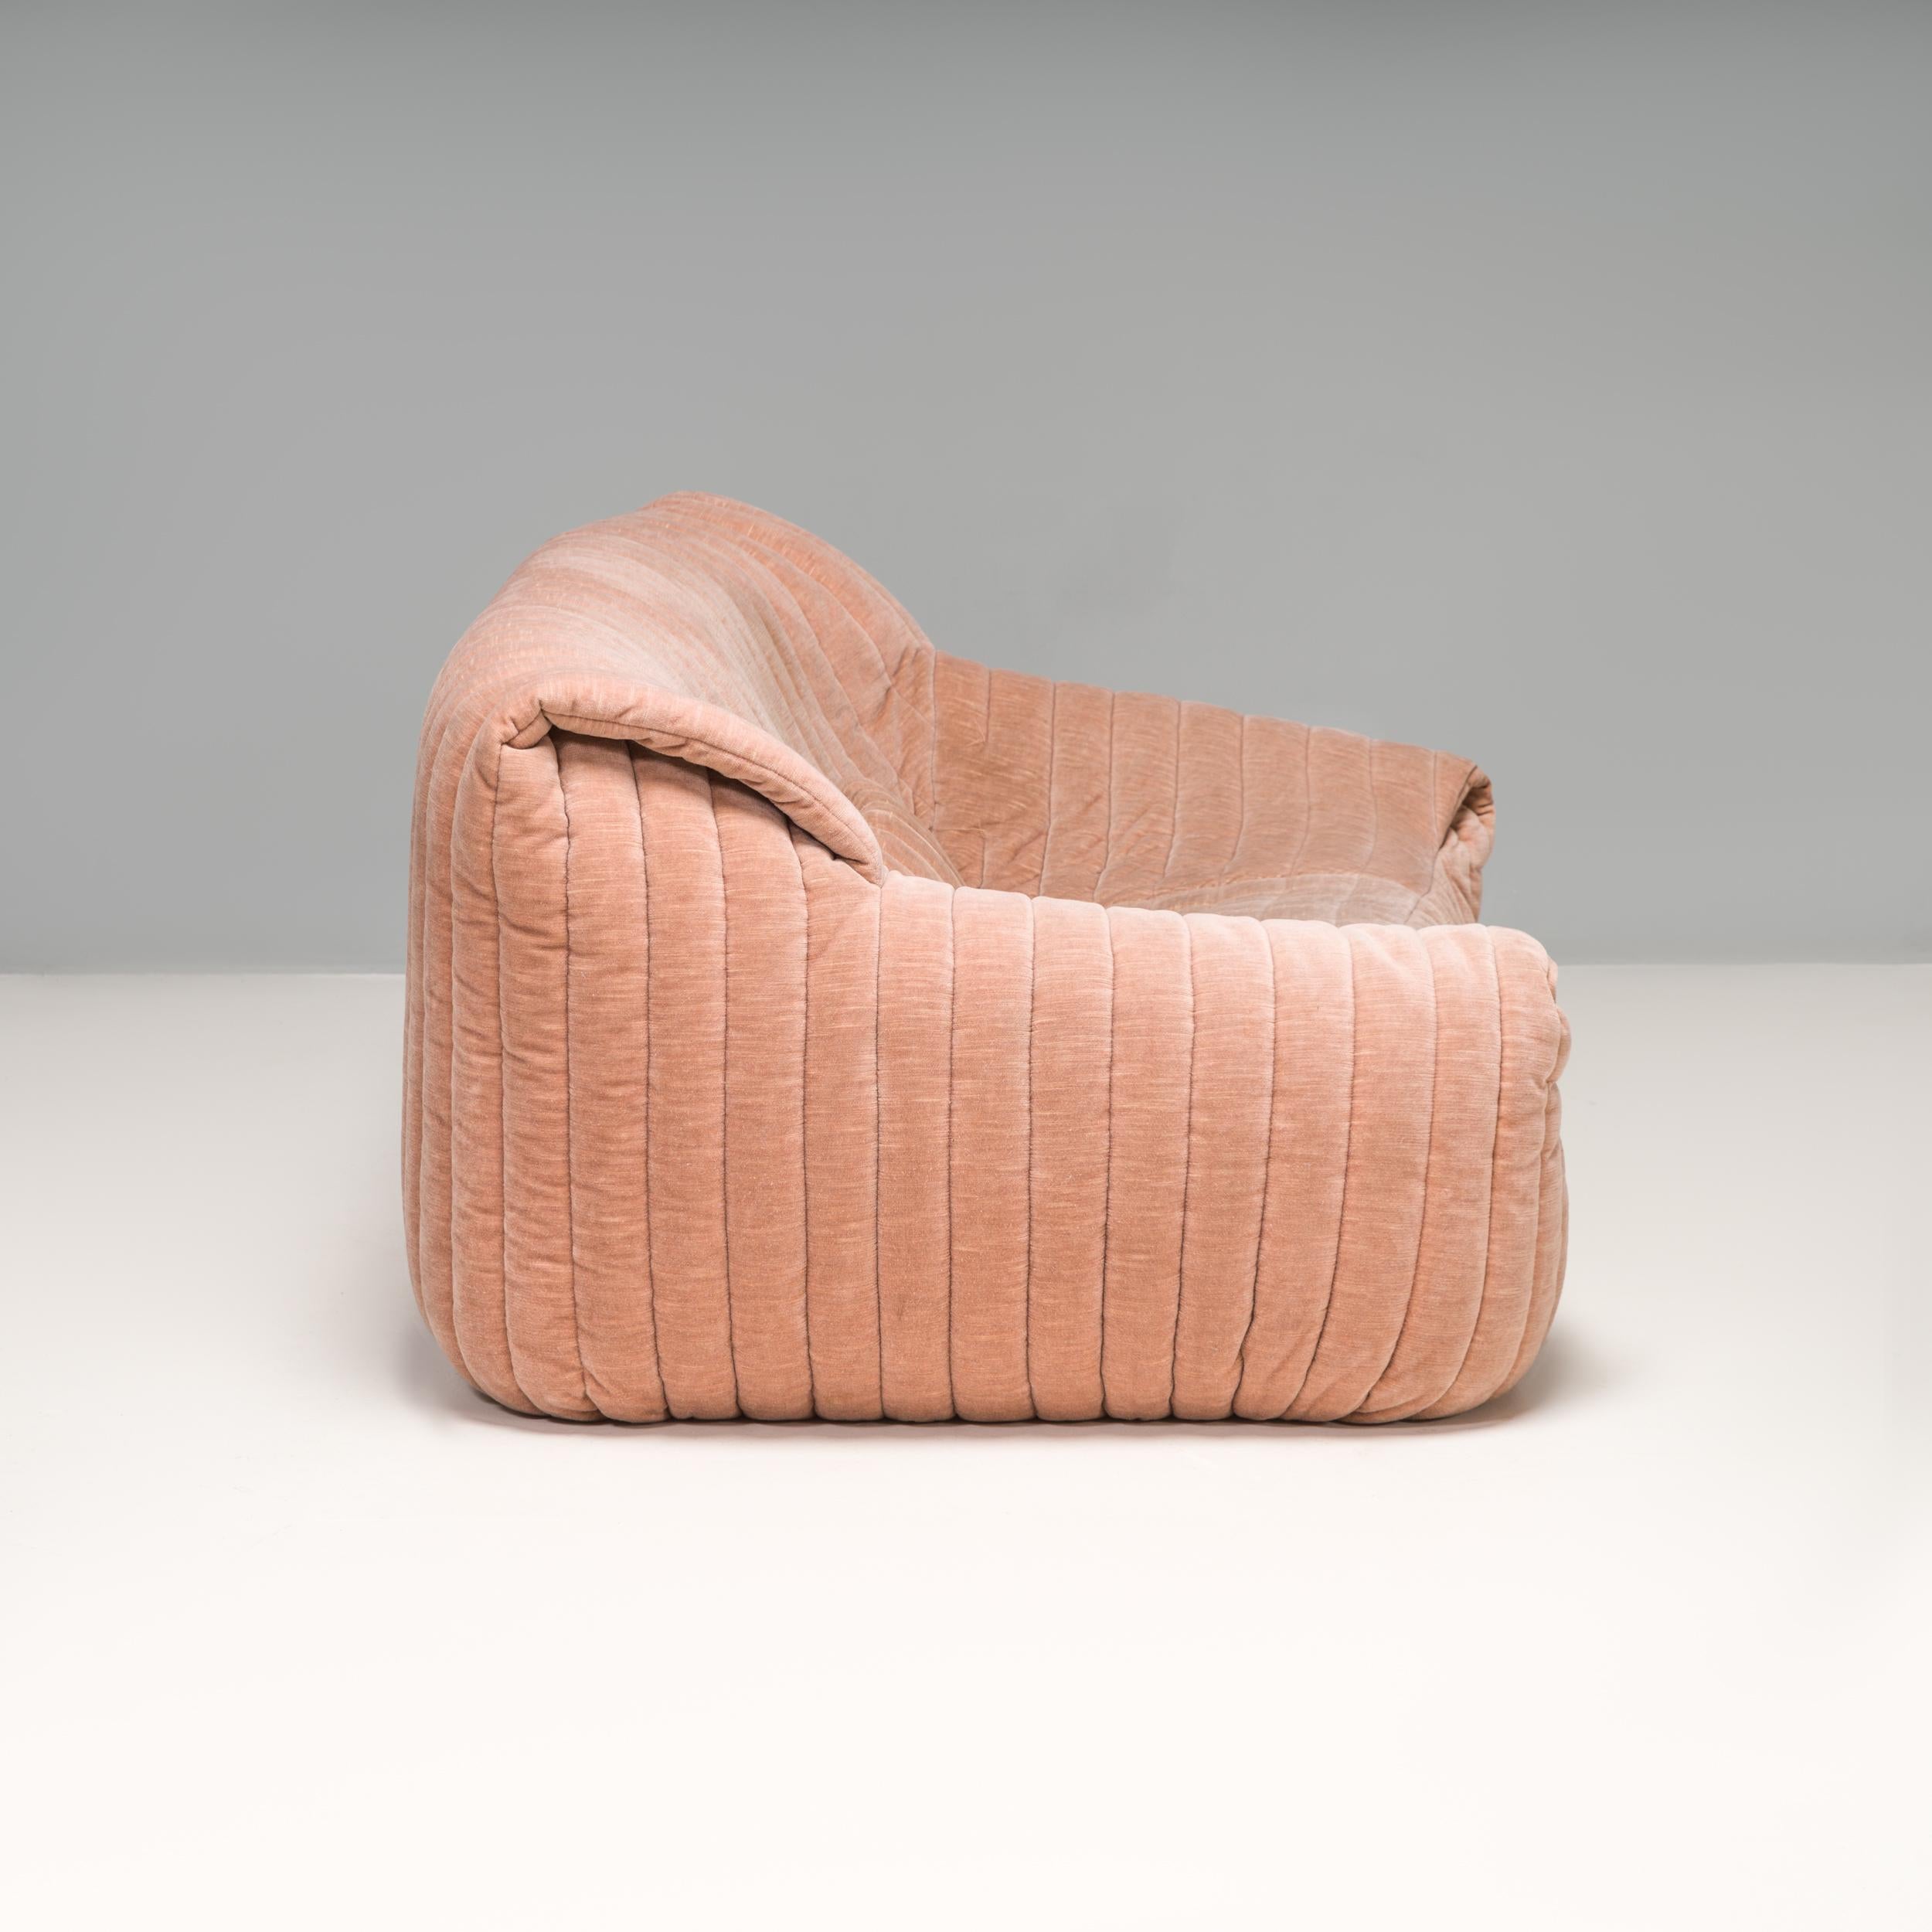 An iconic 1970s design, the Sandra sofa was designed by Annie Hiéronimus for Cinna after she joined the Roset Bureau d'Etudes in 1976.

Constructed from foam, the sofa has a solid form which is fully upholstered in light salmon pink ribbed